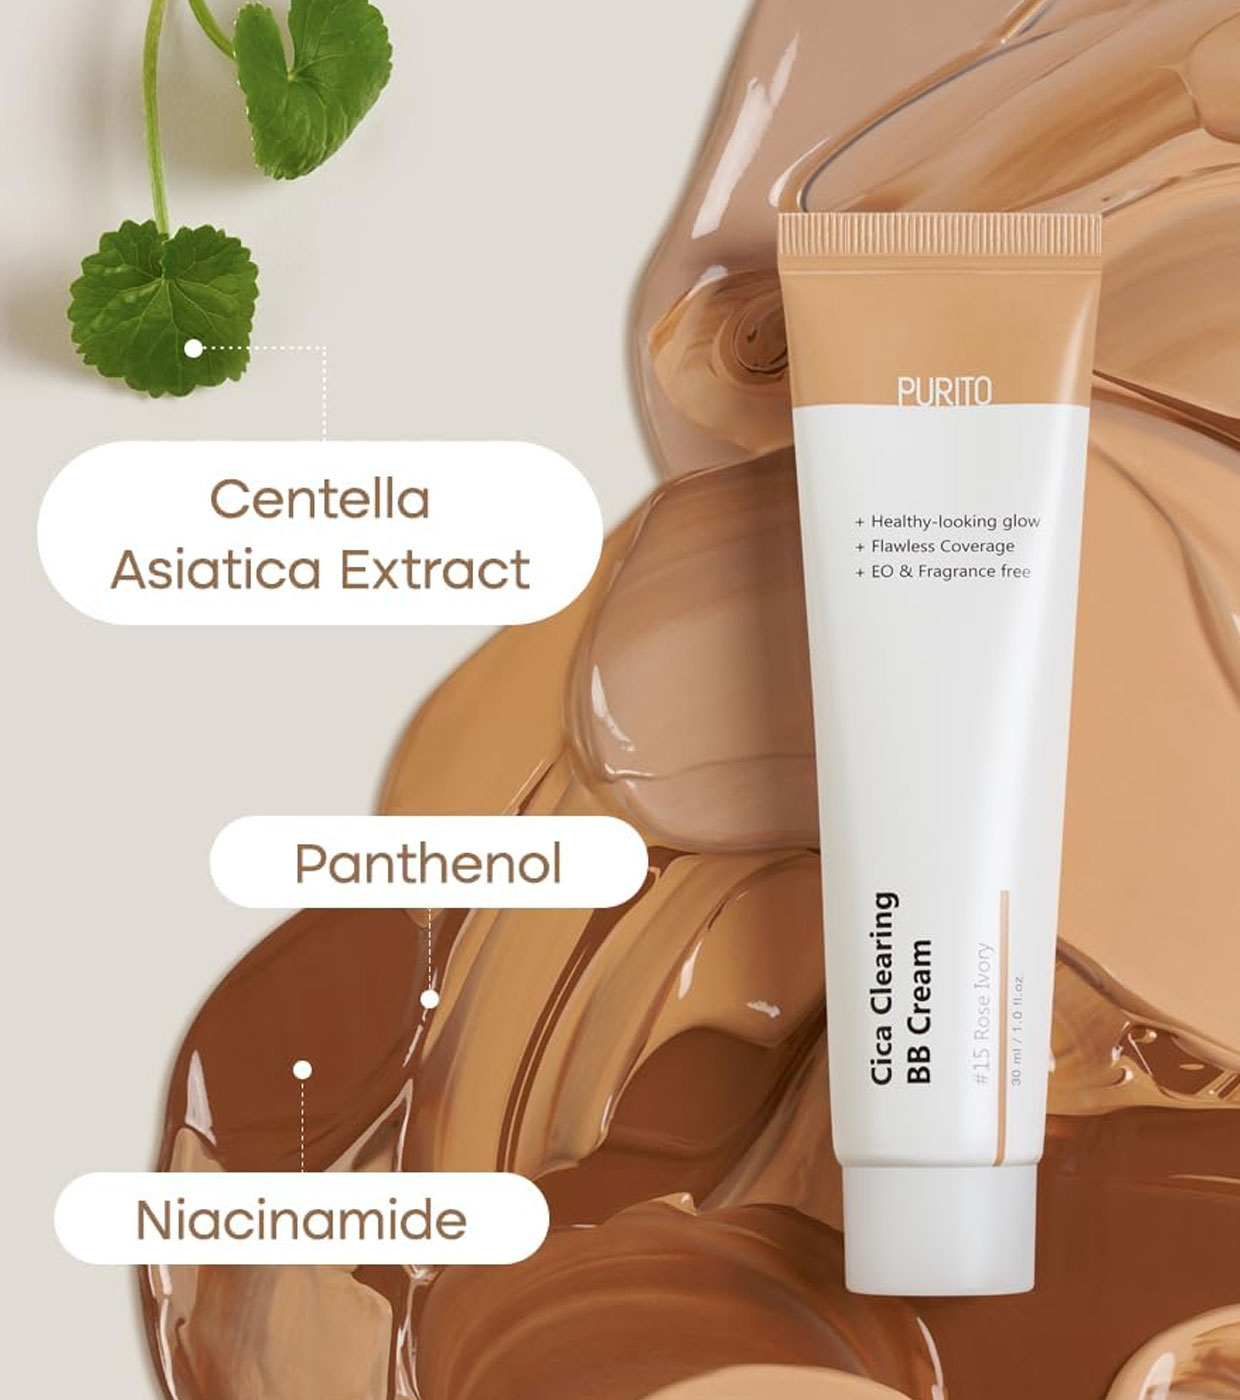 https://www.maquibeauty.com/images/productos/purito-bb-cream-cica-clearing-27n-sand-beige-2-81733.jpeg